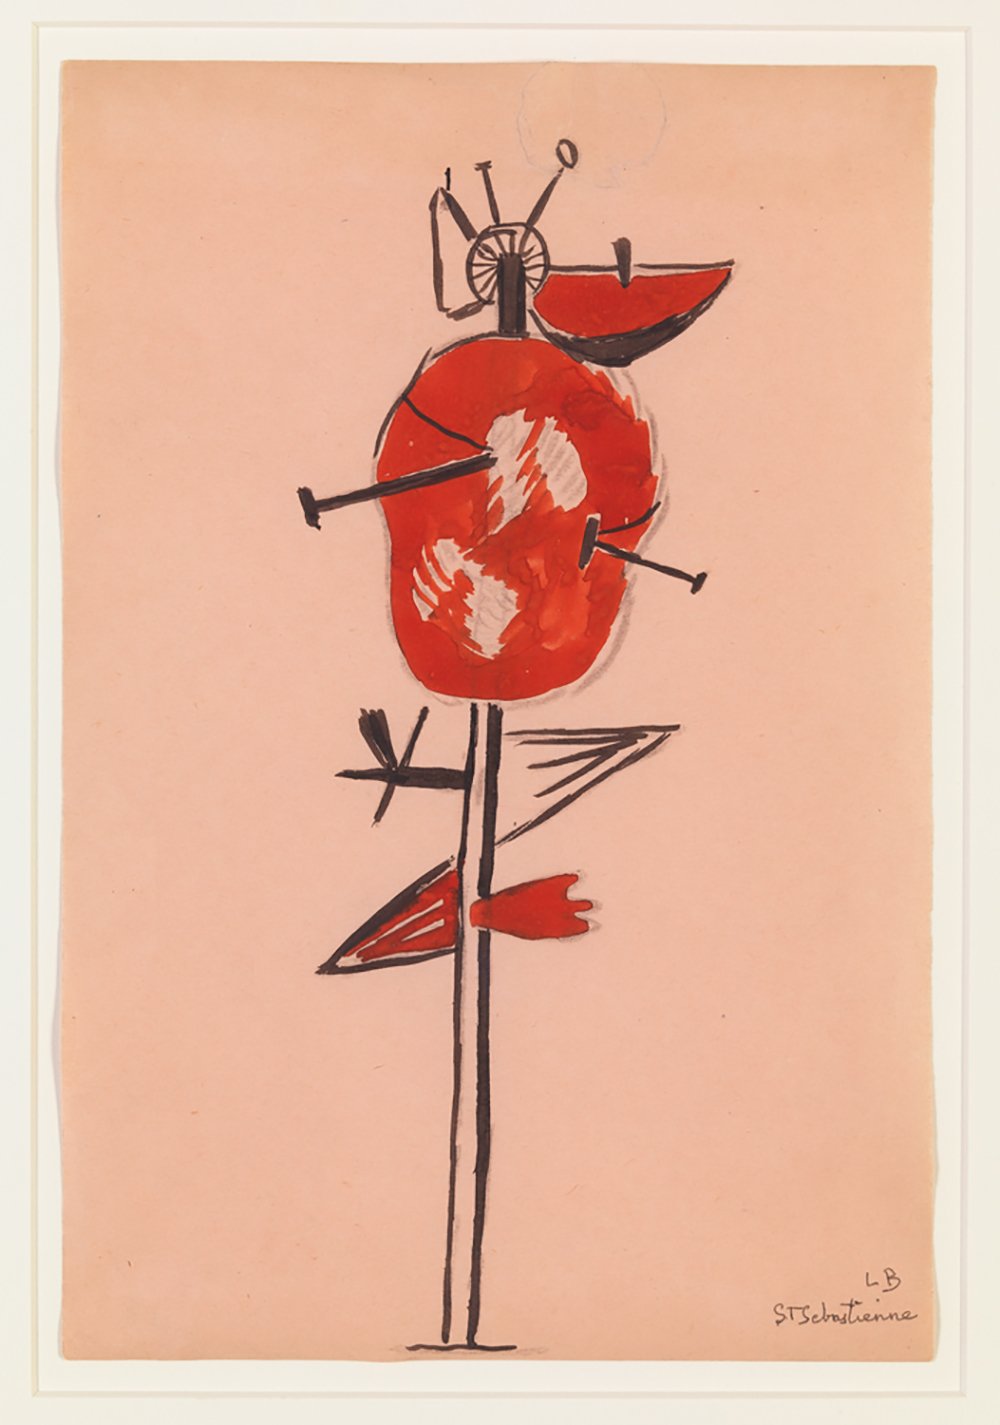 Intimate Geometries: The Art and Life of Louise Bourgeois – and